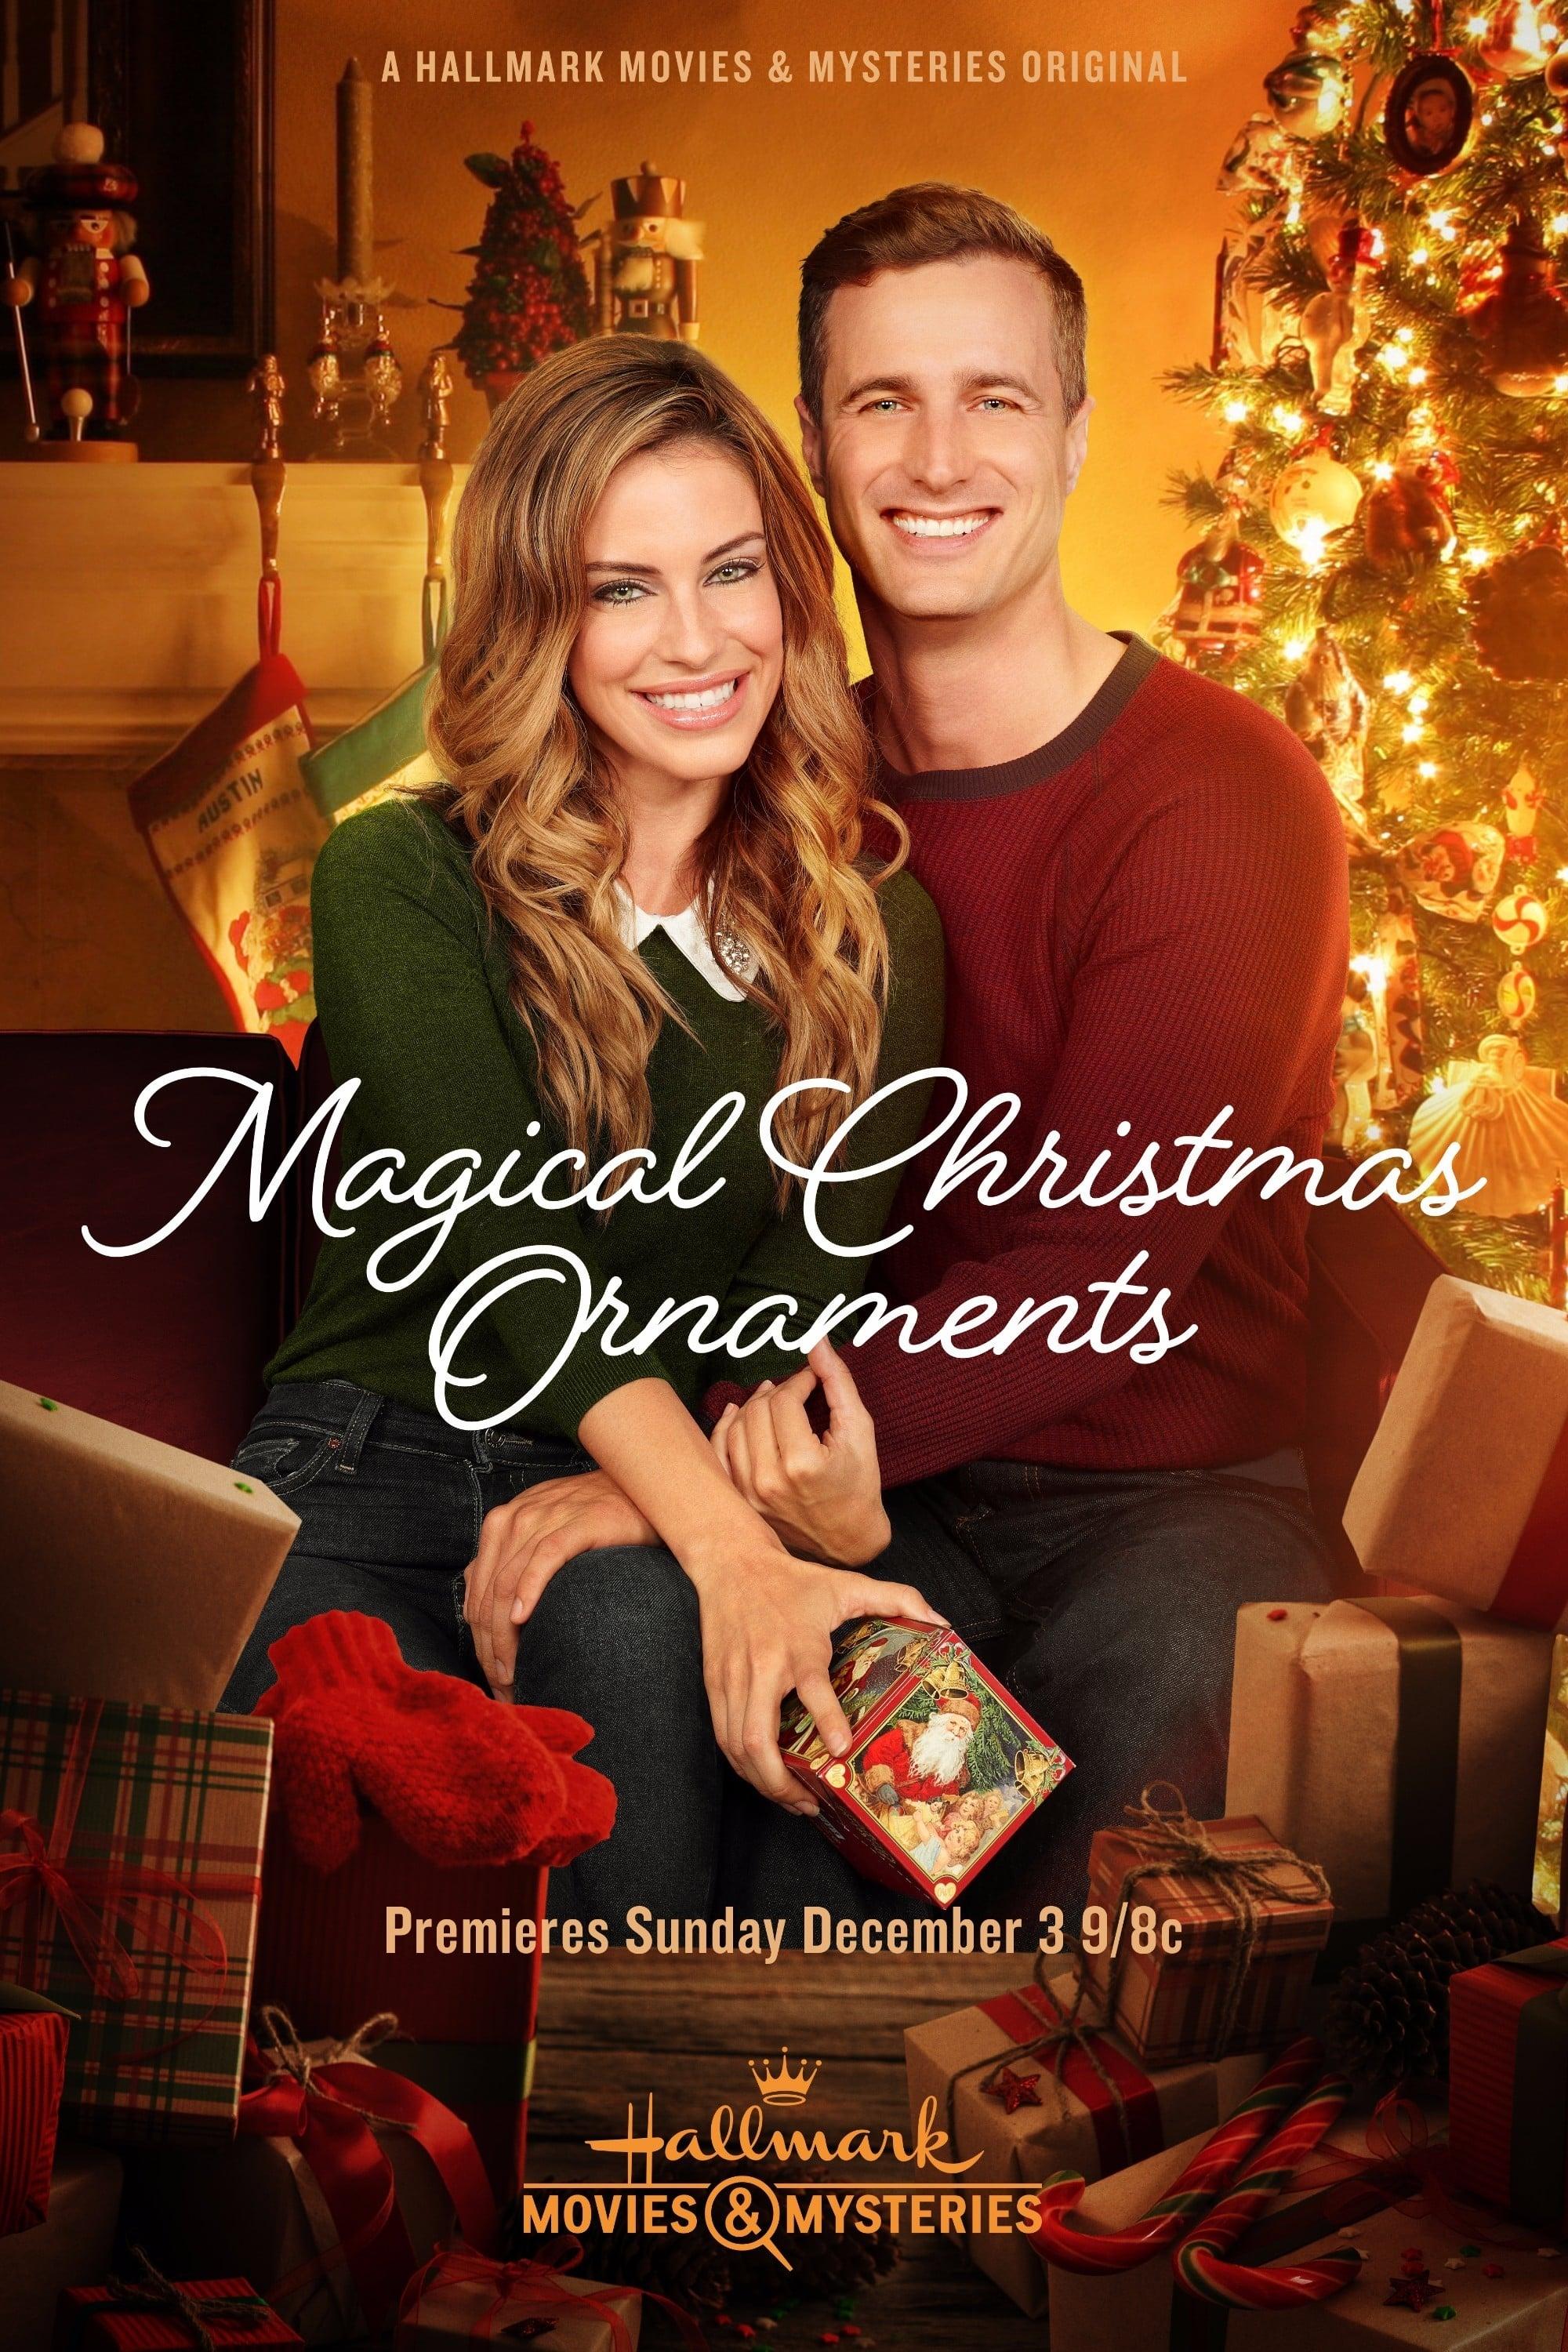 Magical Christmas Ornaments poster